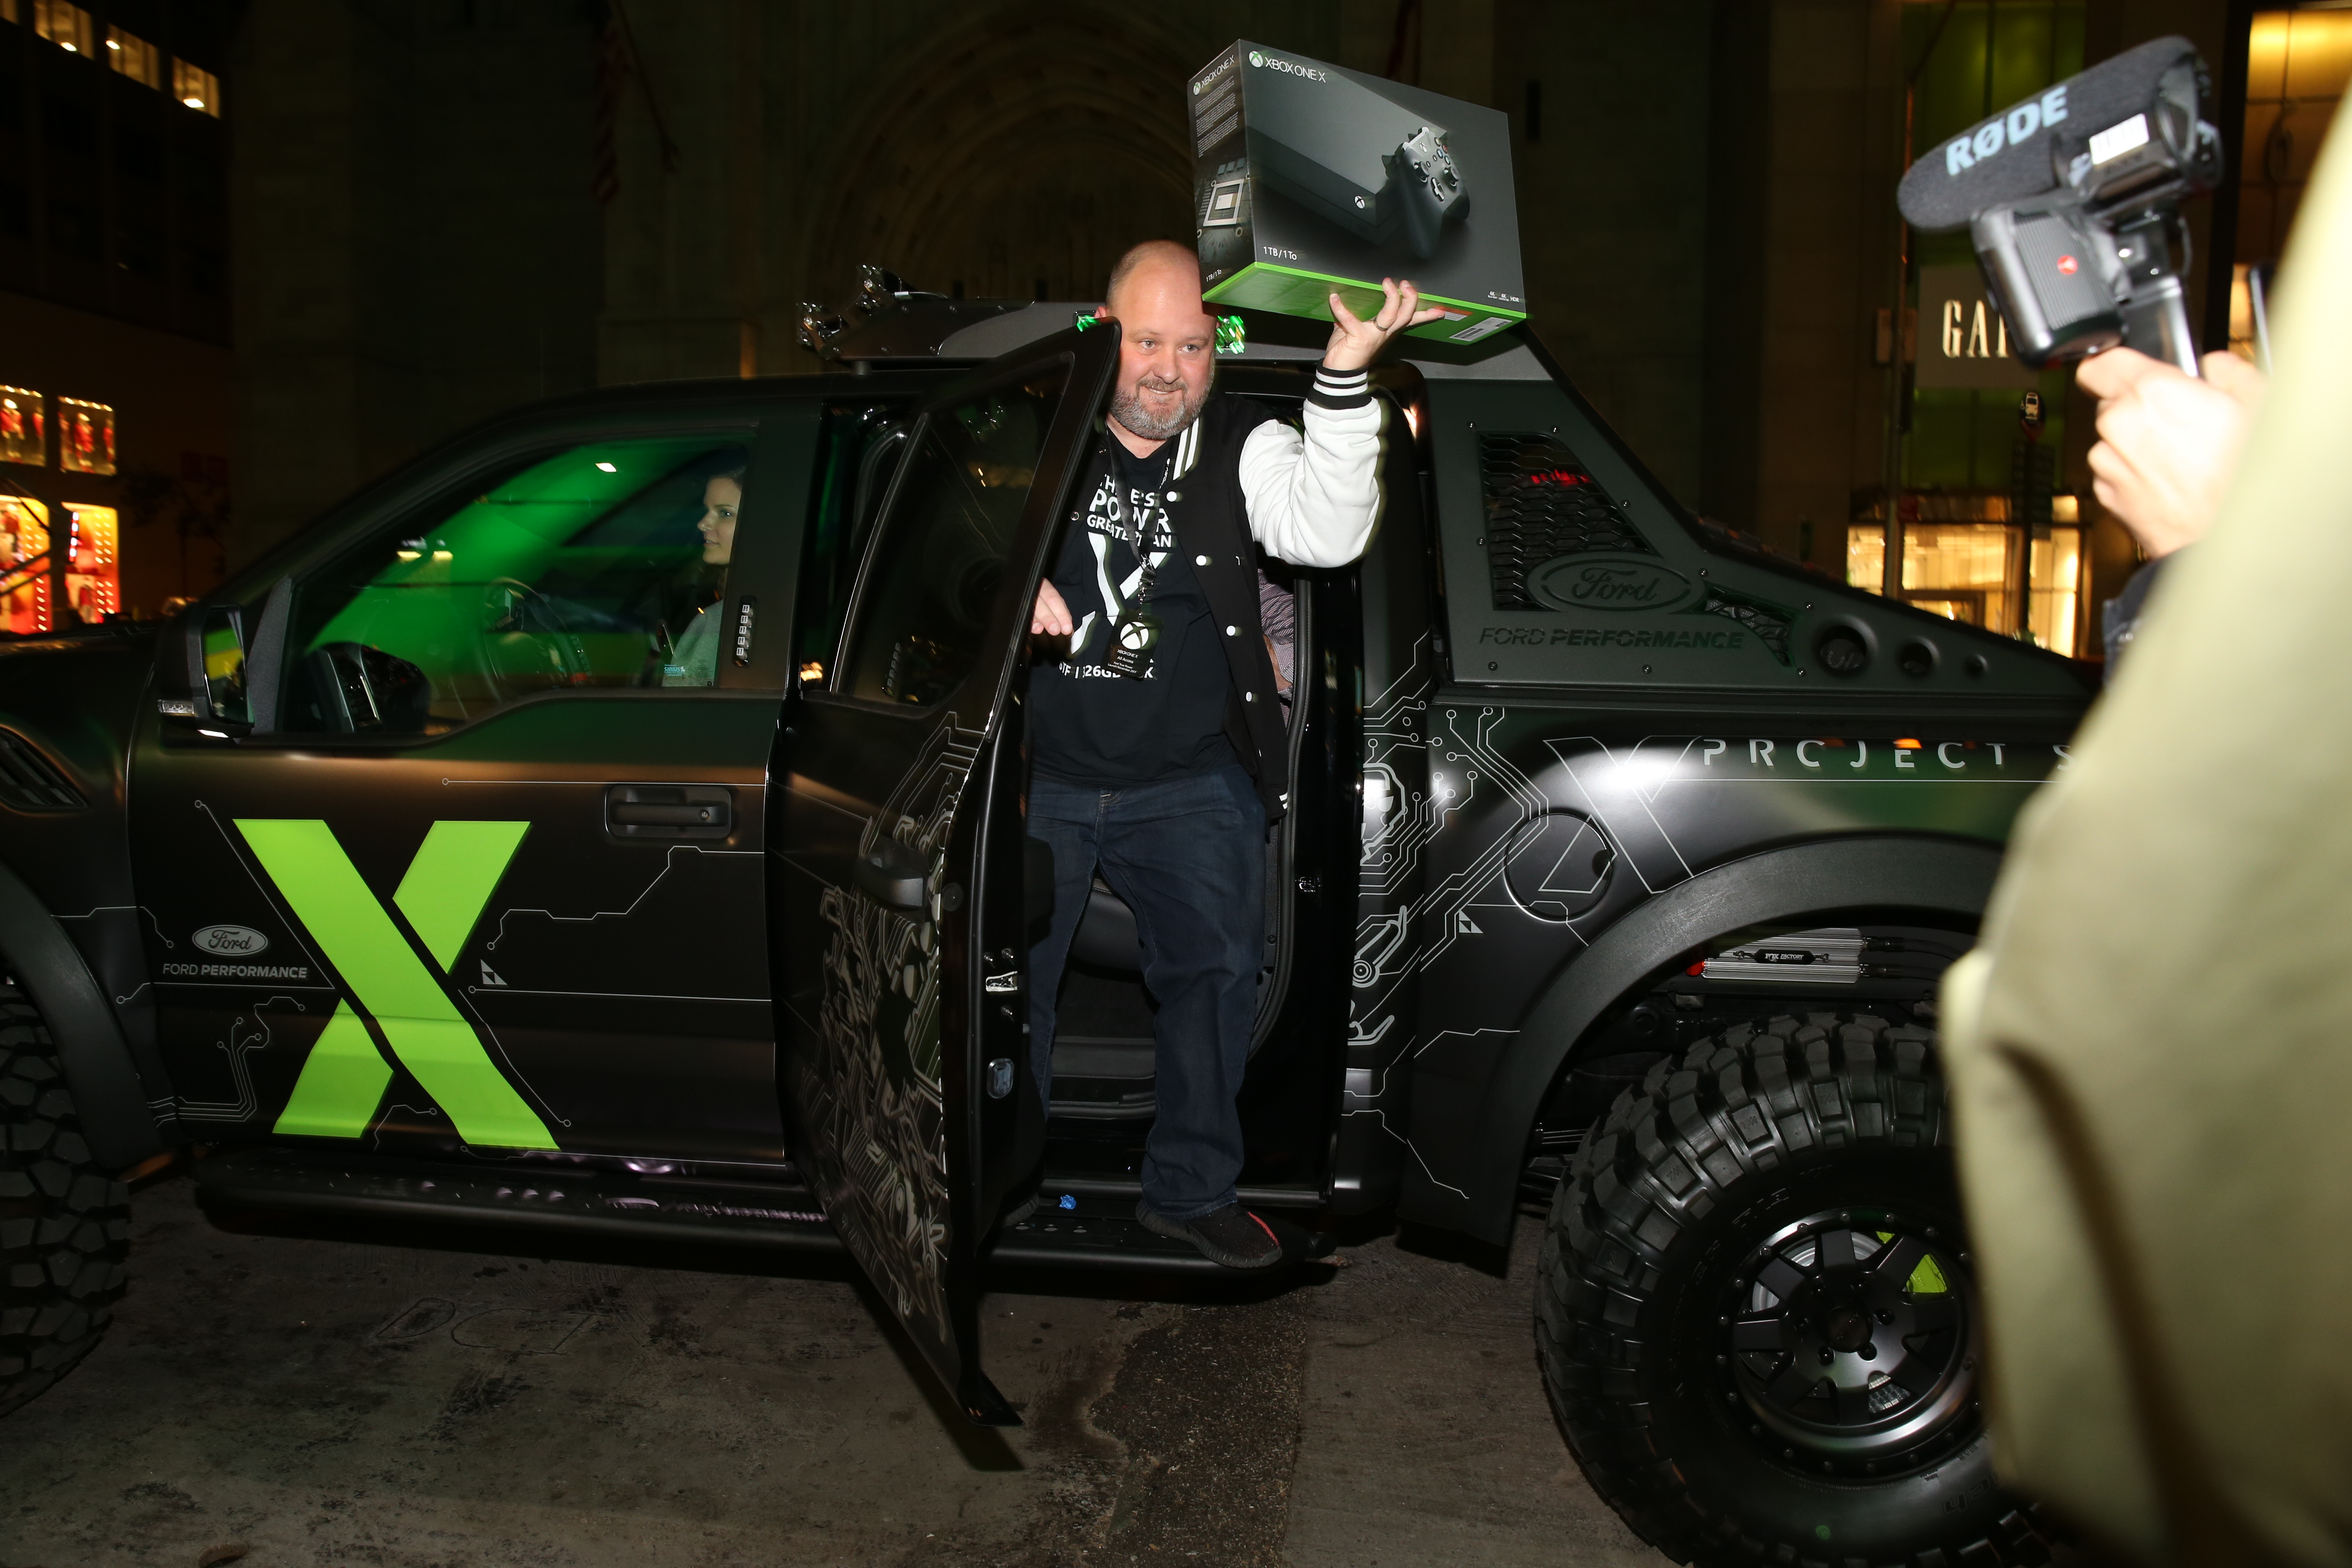 Xbox One X Delivered at Times Square